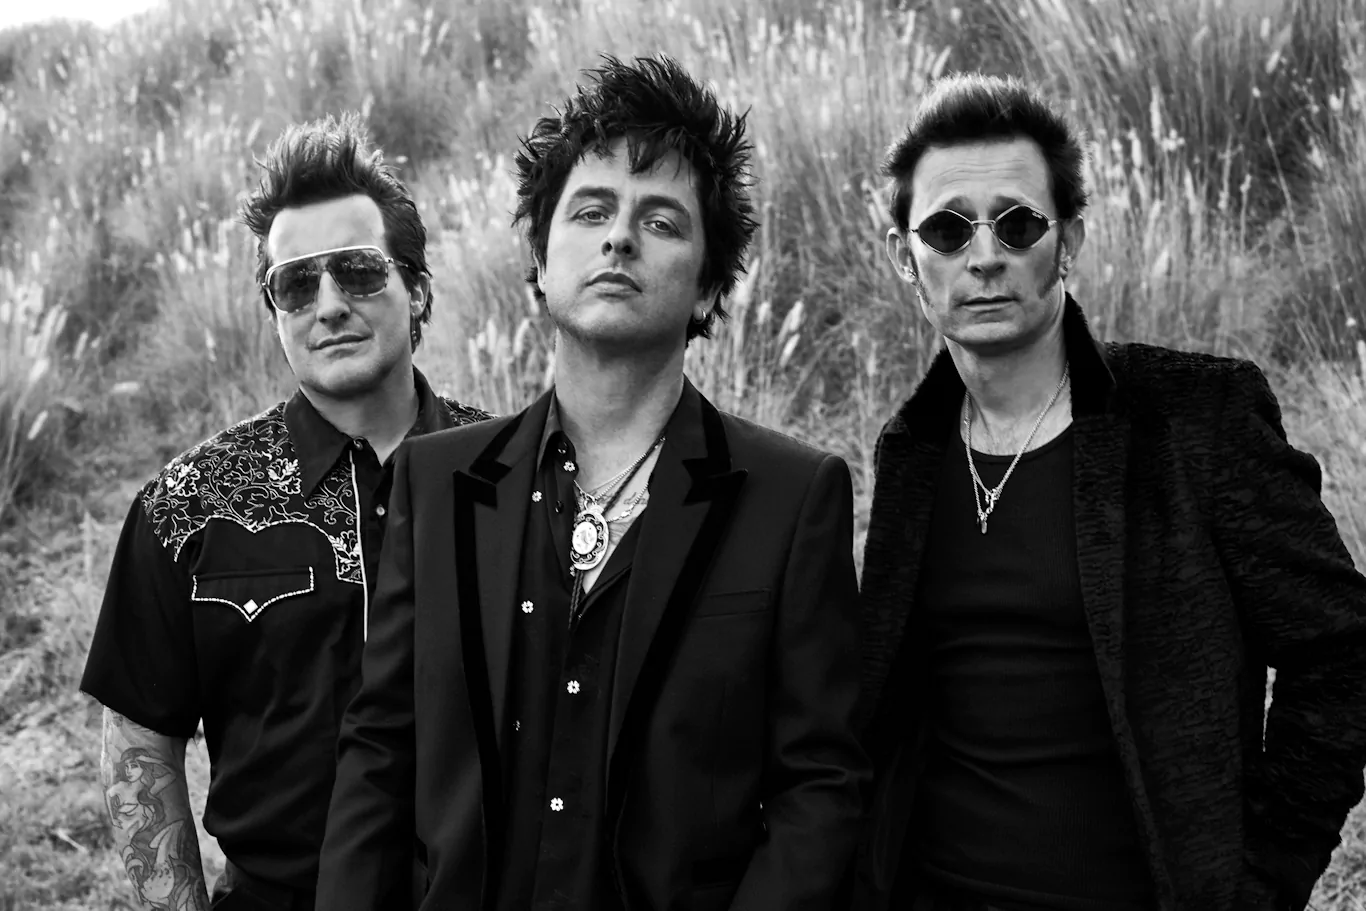 GREEN DAY to officially release THE BBC SESSIONS live album on December 10th